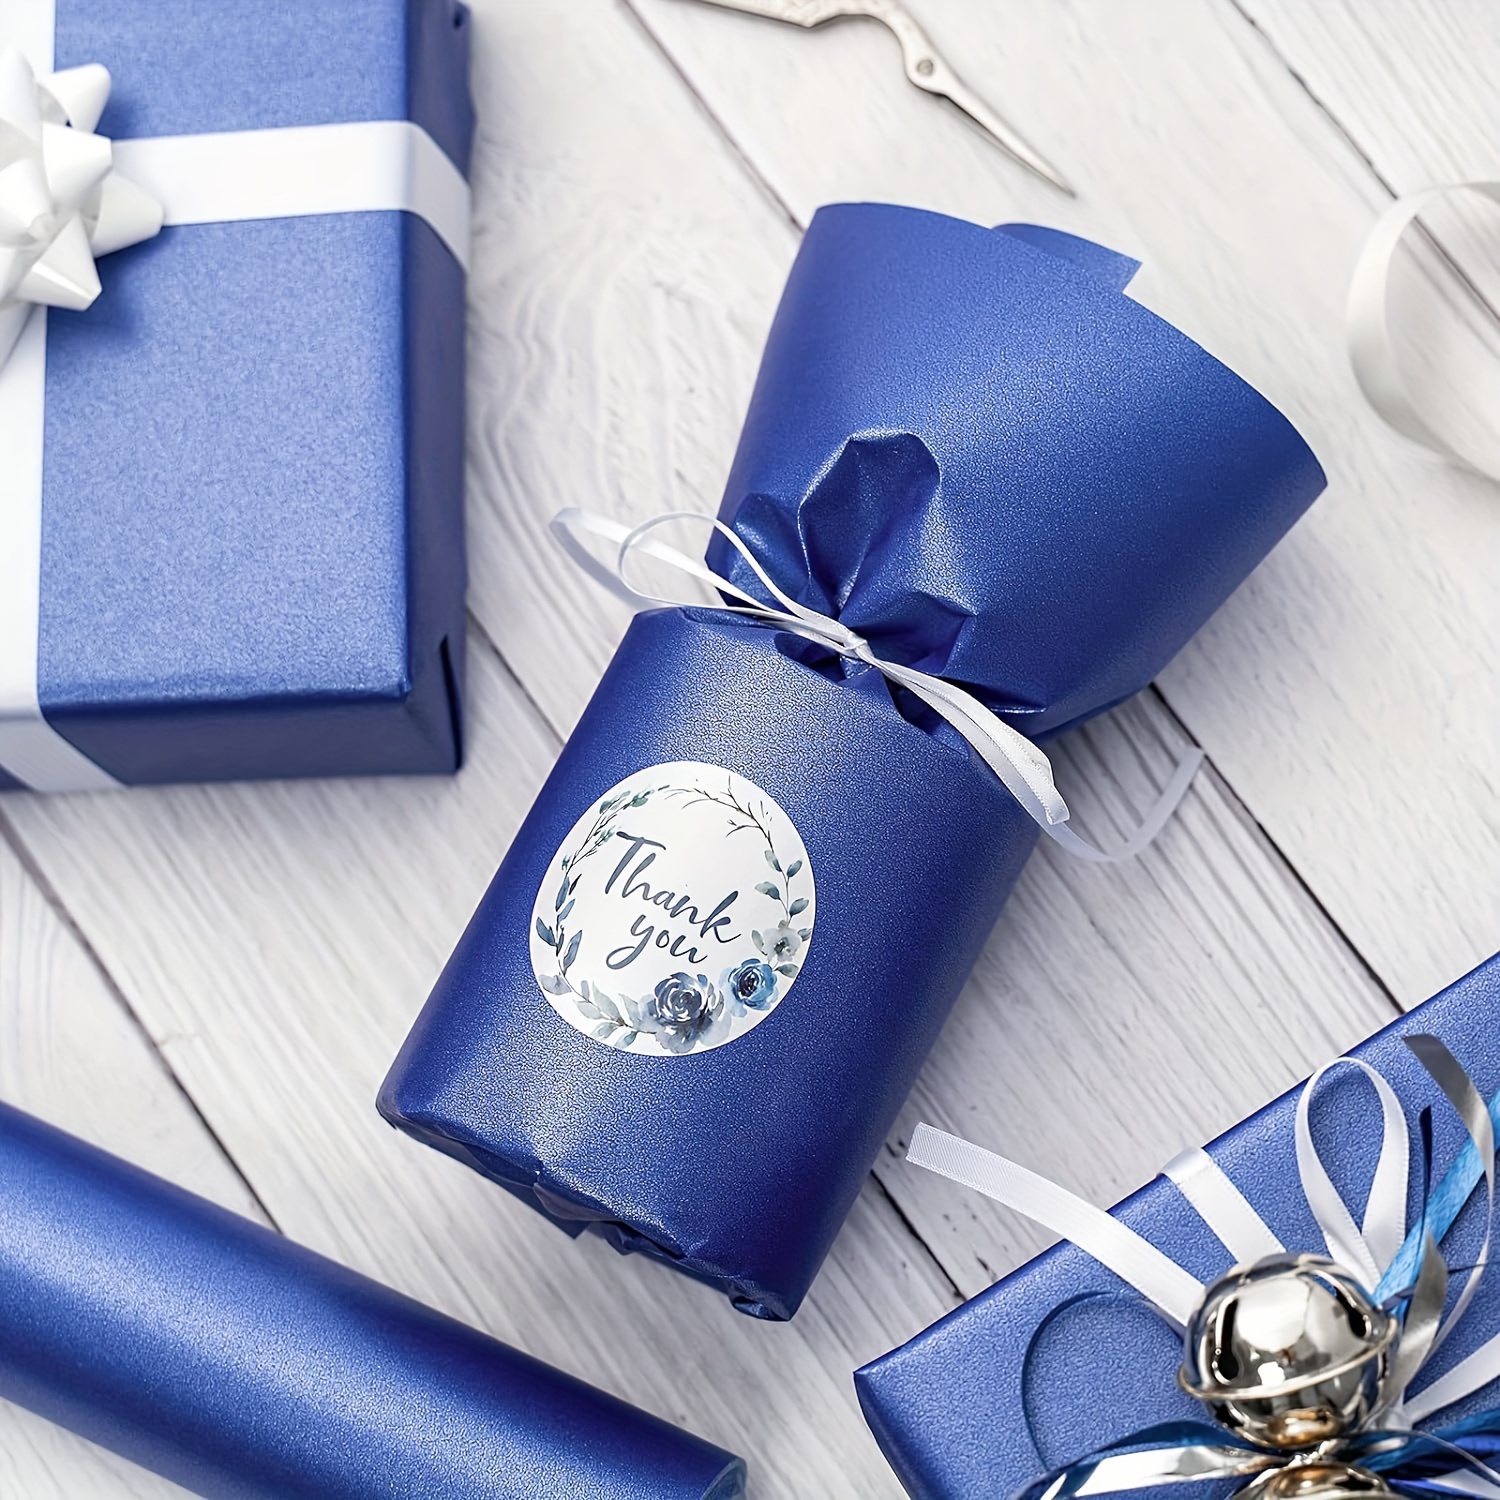 Matte Royal Blue Gift Wrap Rolls 5 ft x 30 in (8 Pieces)